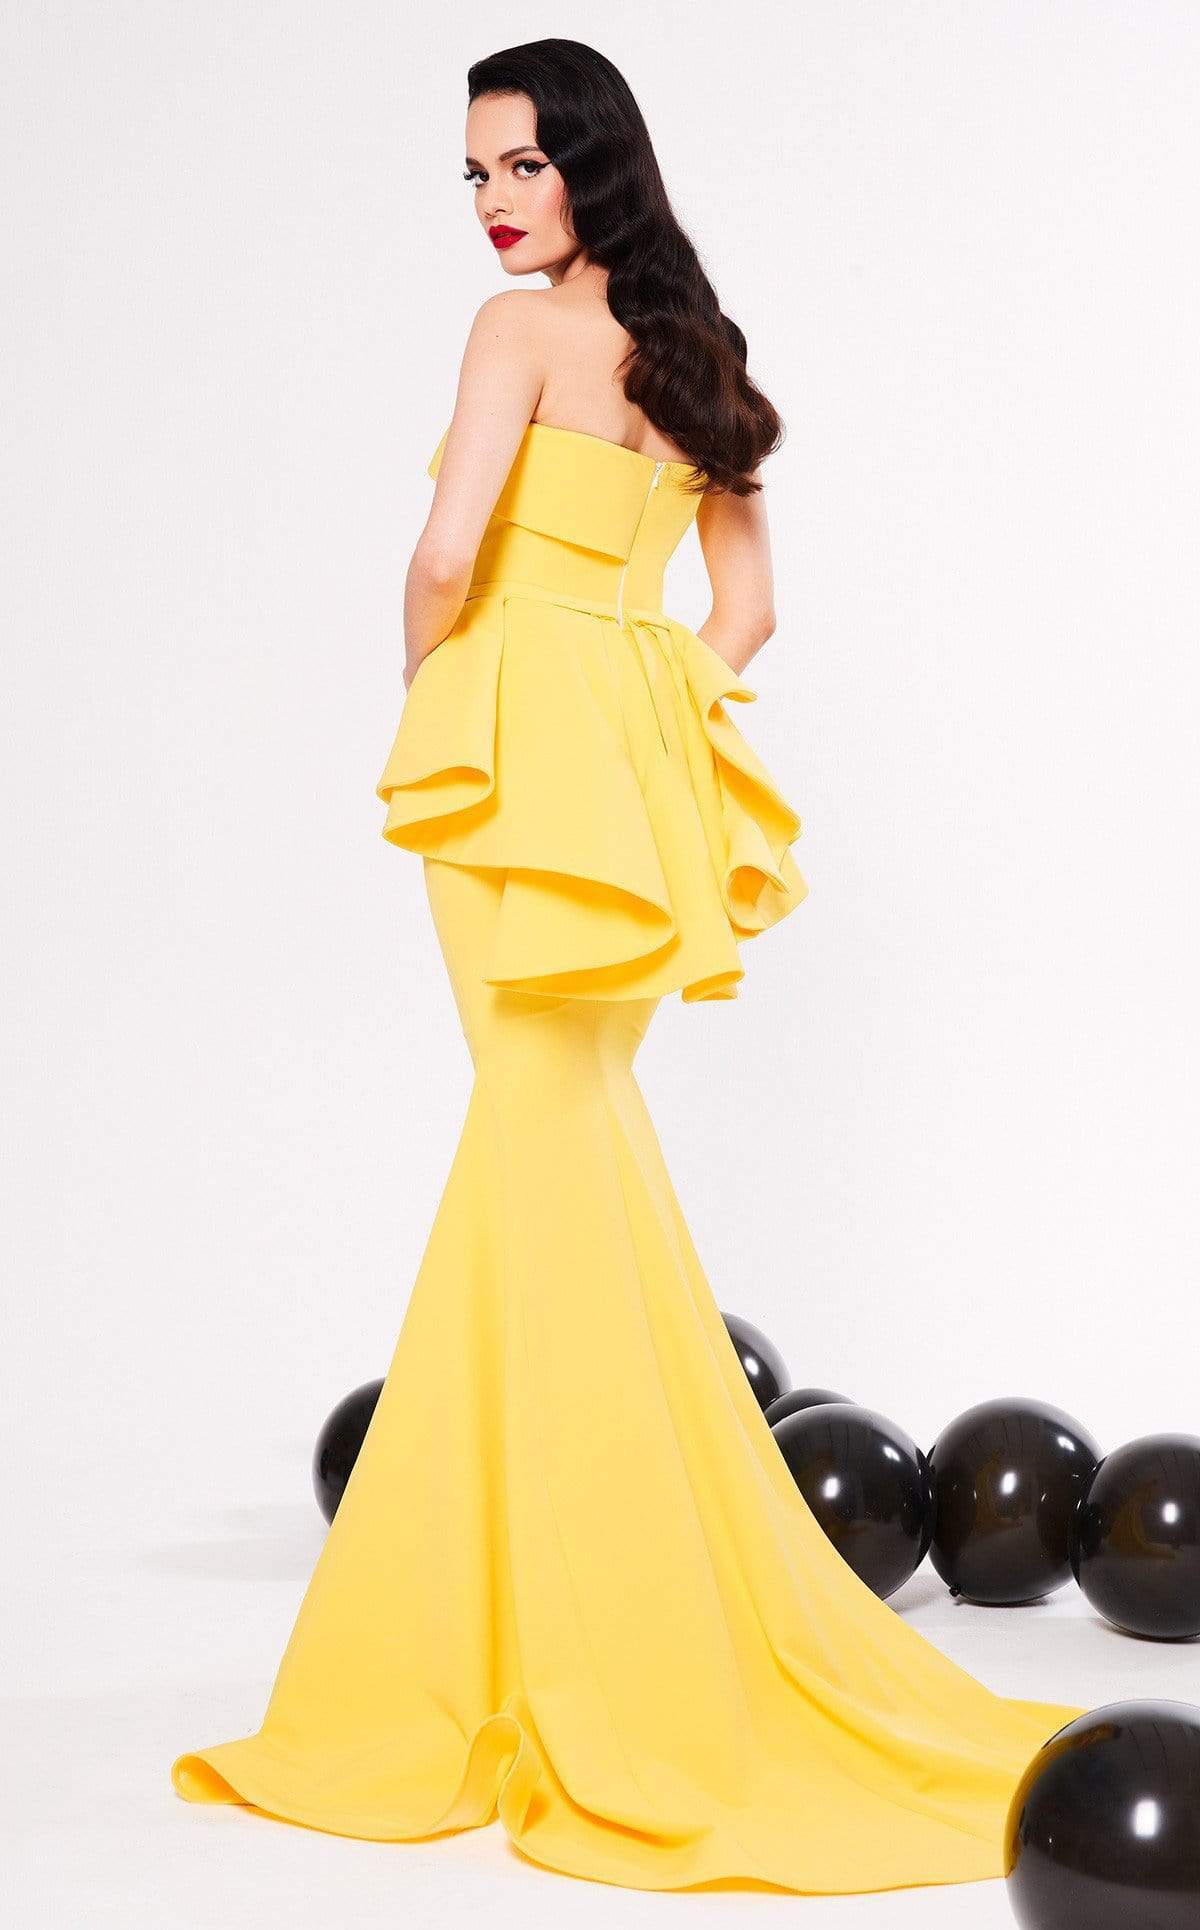 MNM COUTURE - N0325 Strapless Off Shoulder Ruffled Peplum Mermaid Gown In Yellow